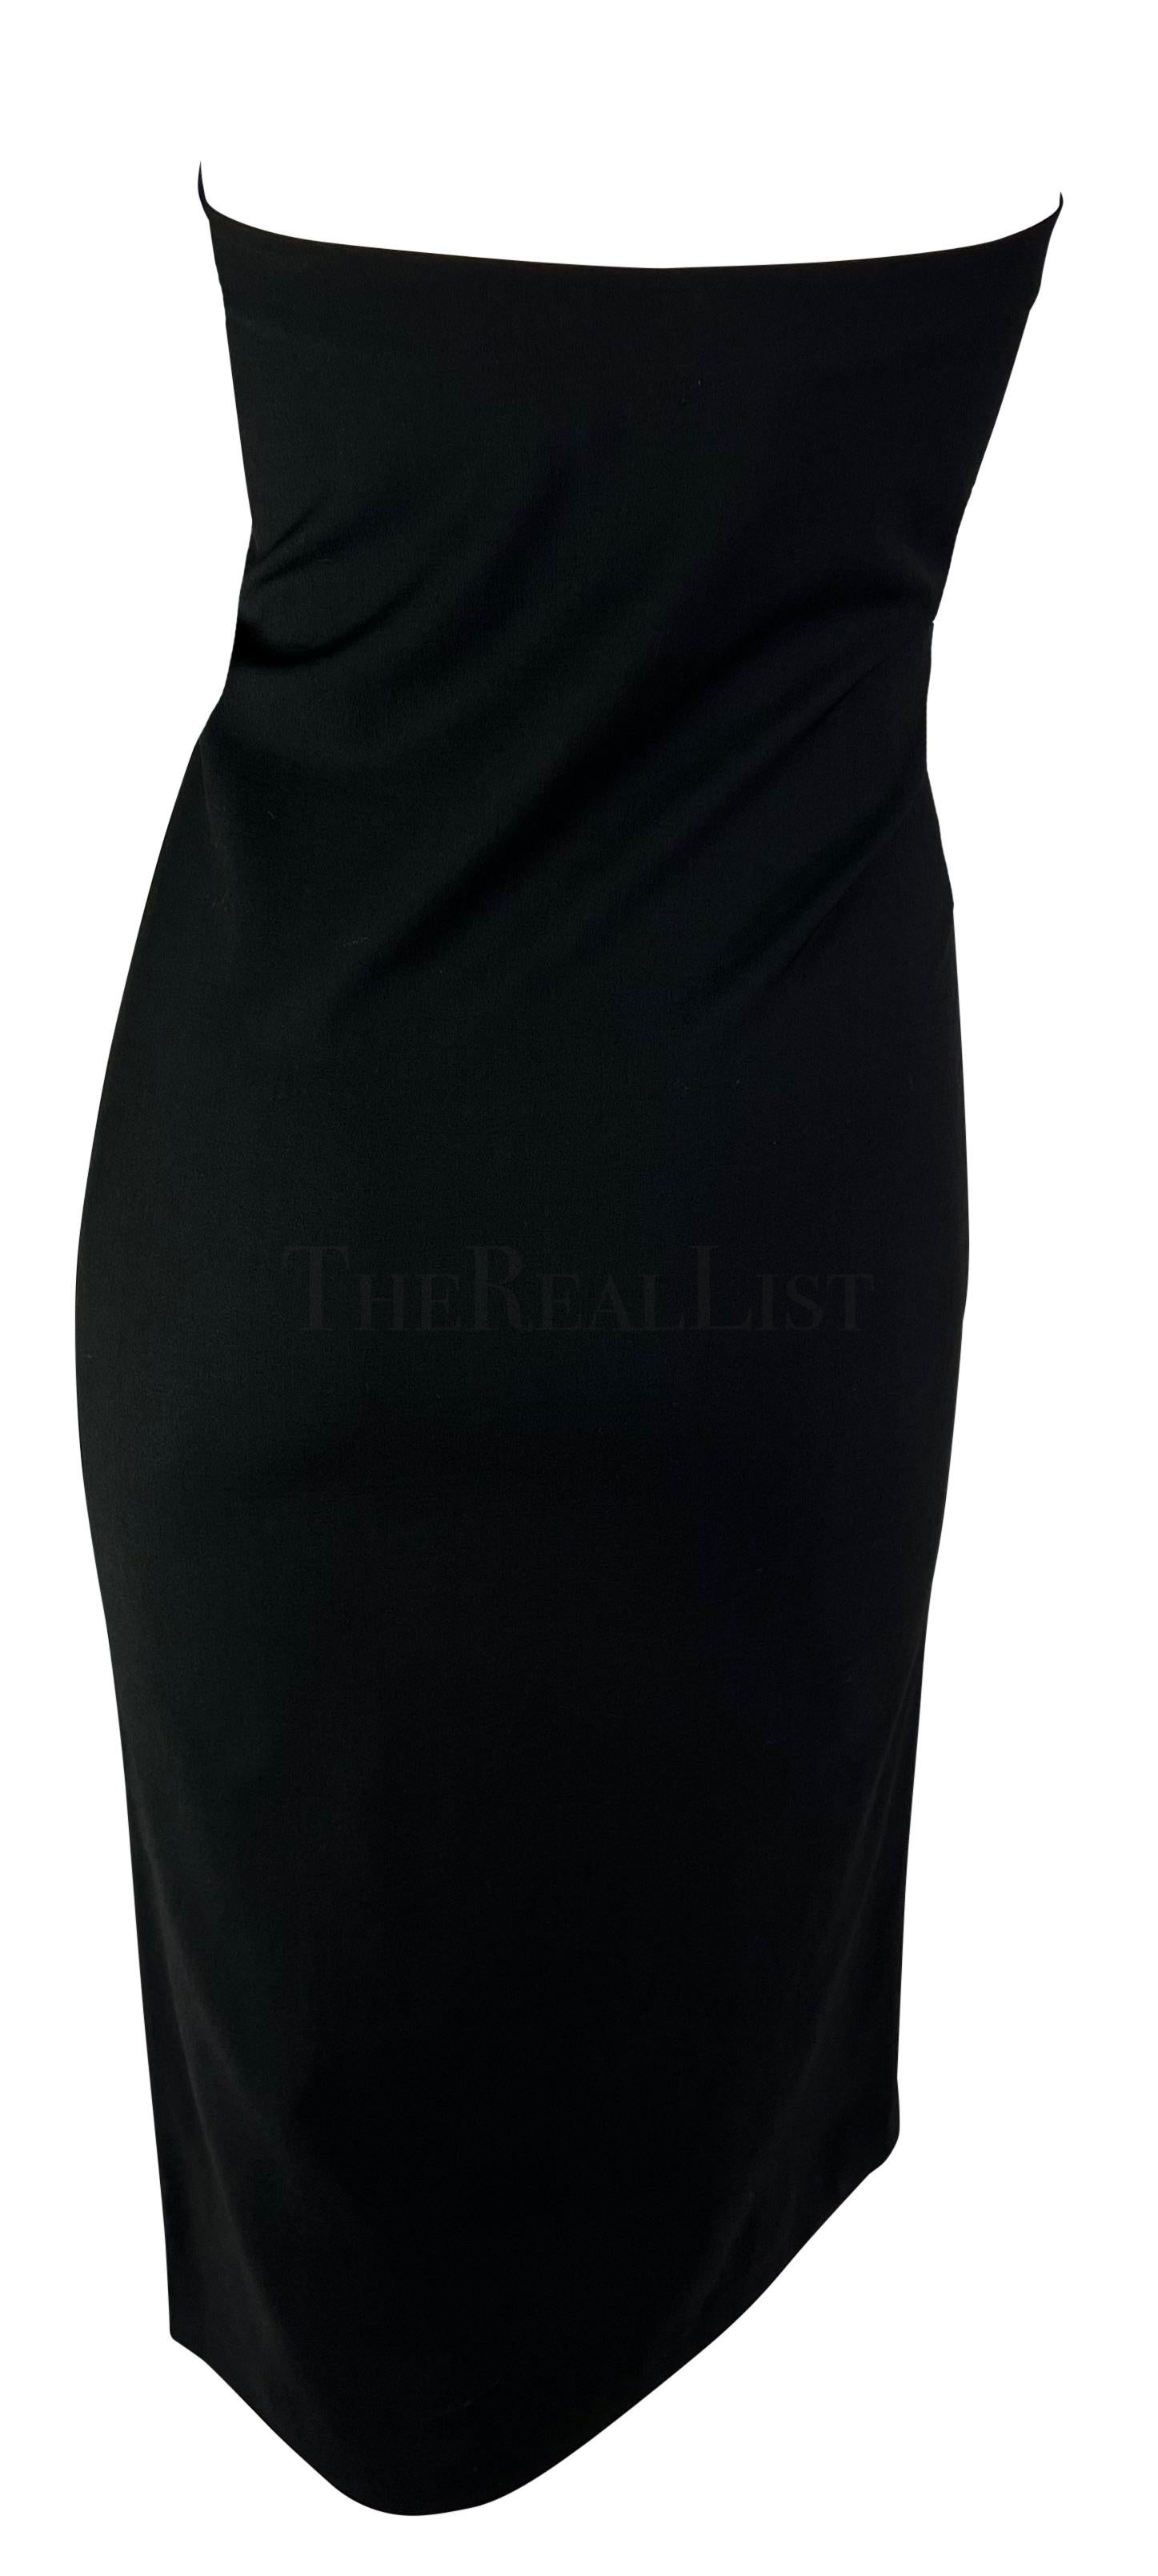 S/S 1997 Gucci by Tom Ford Black Strapless Bodycon Mini Dress  For Sale 3